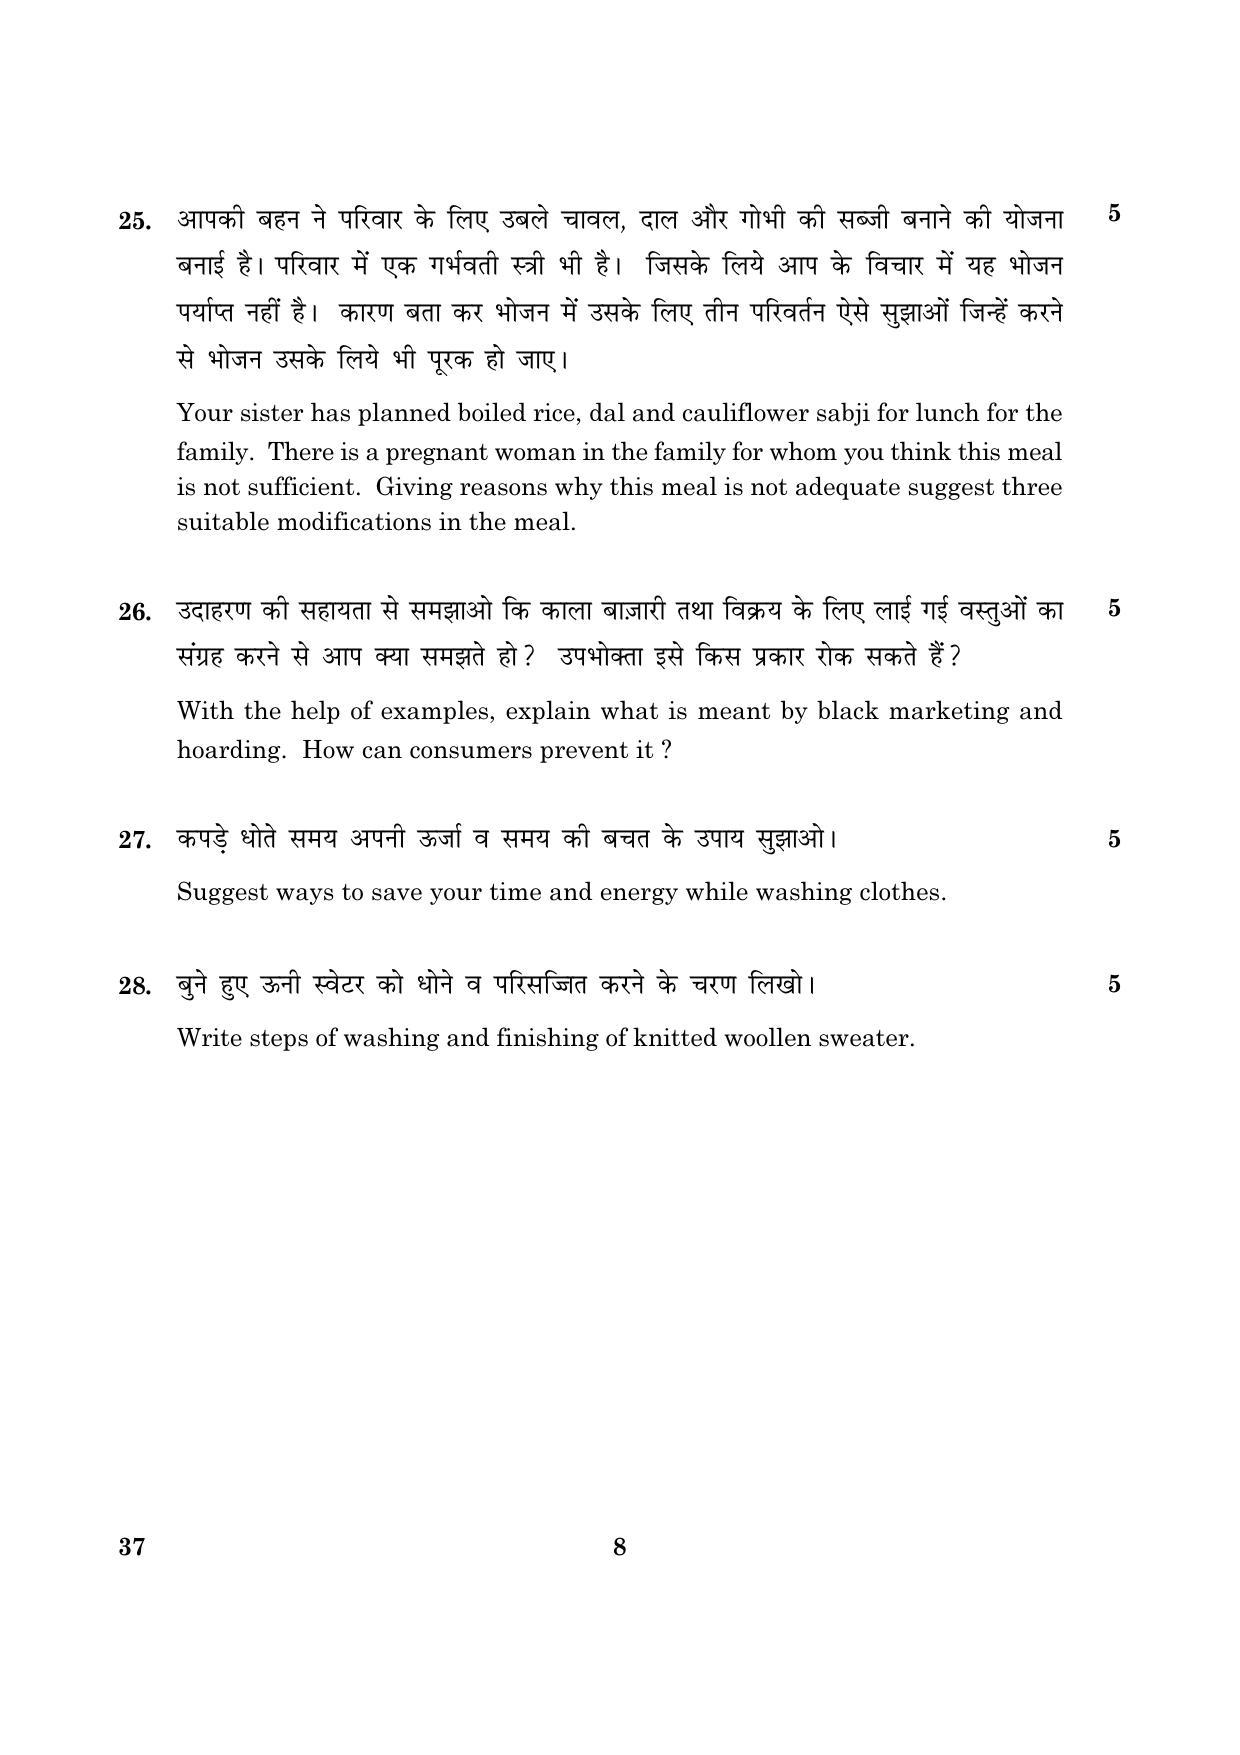 CBSE Class 10 037 Home Science 2016 Question Paper - Page 8